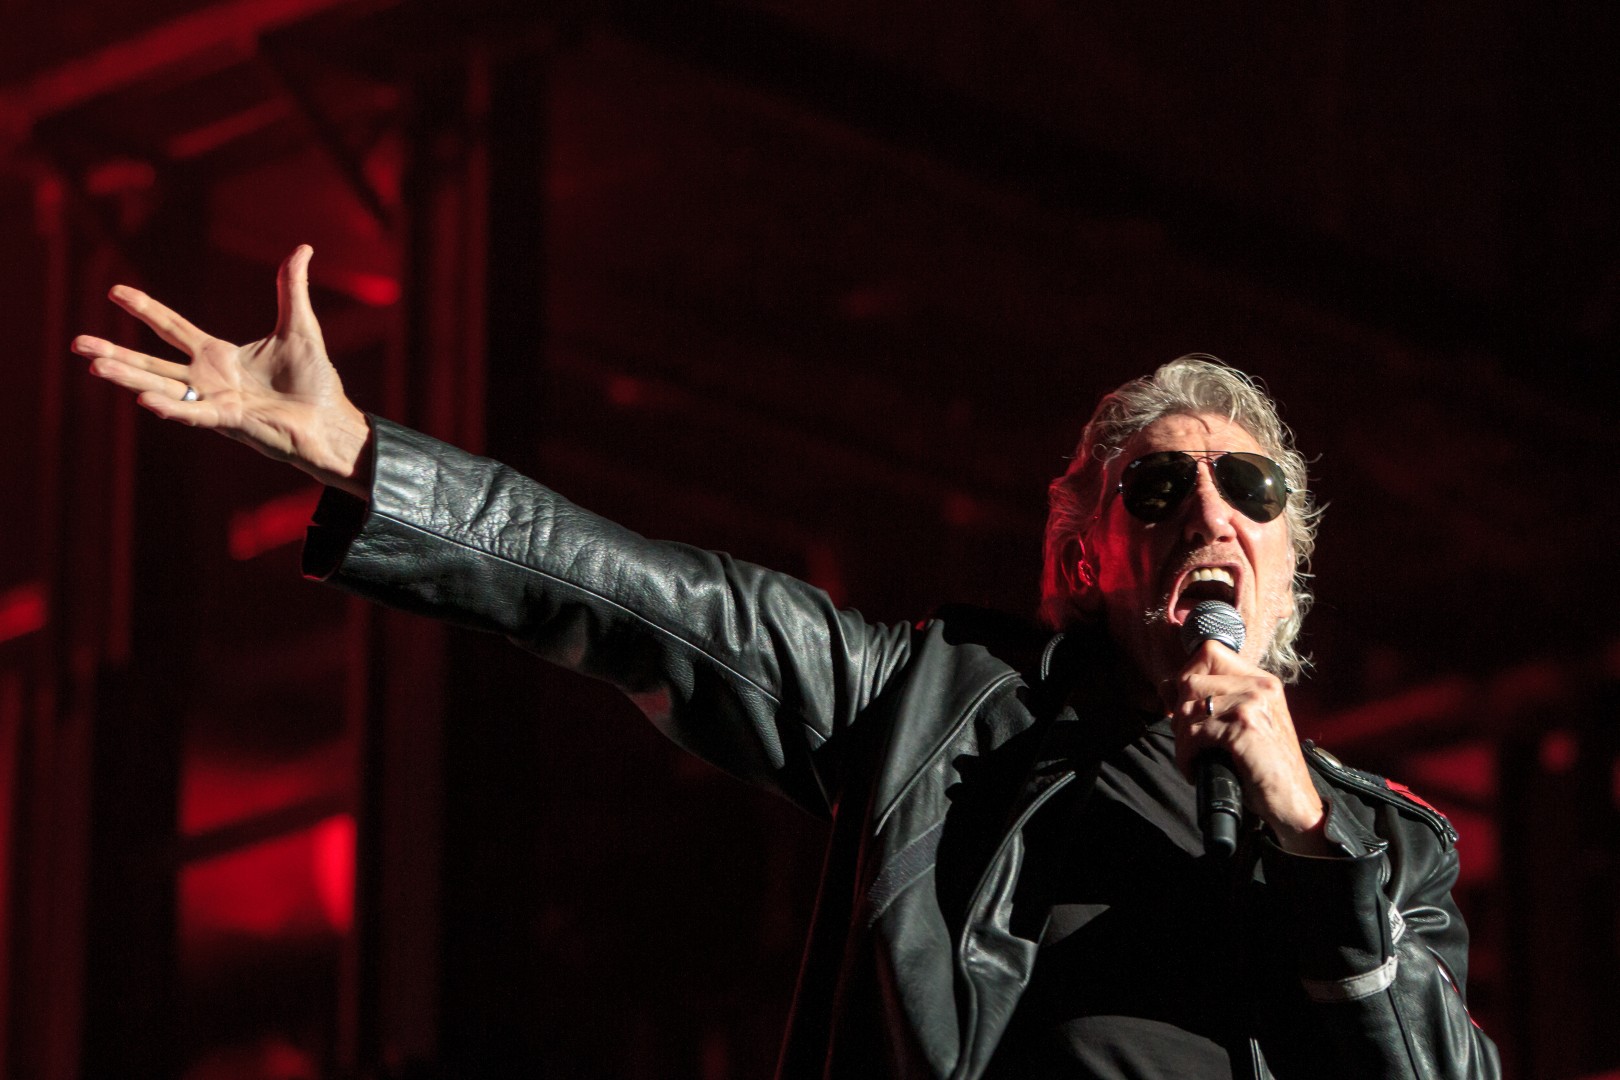 Roger Waters at Piața Constituției in Bucharest on August 28, 2013 (ea1b0a4503)